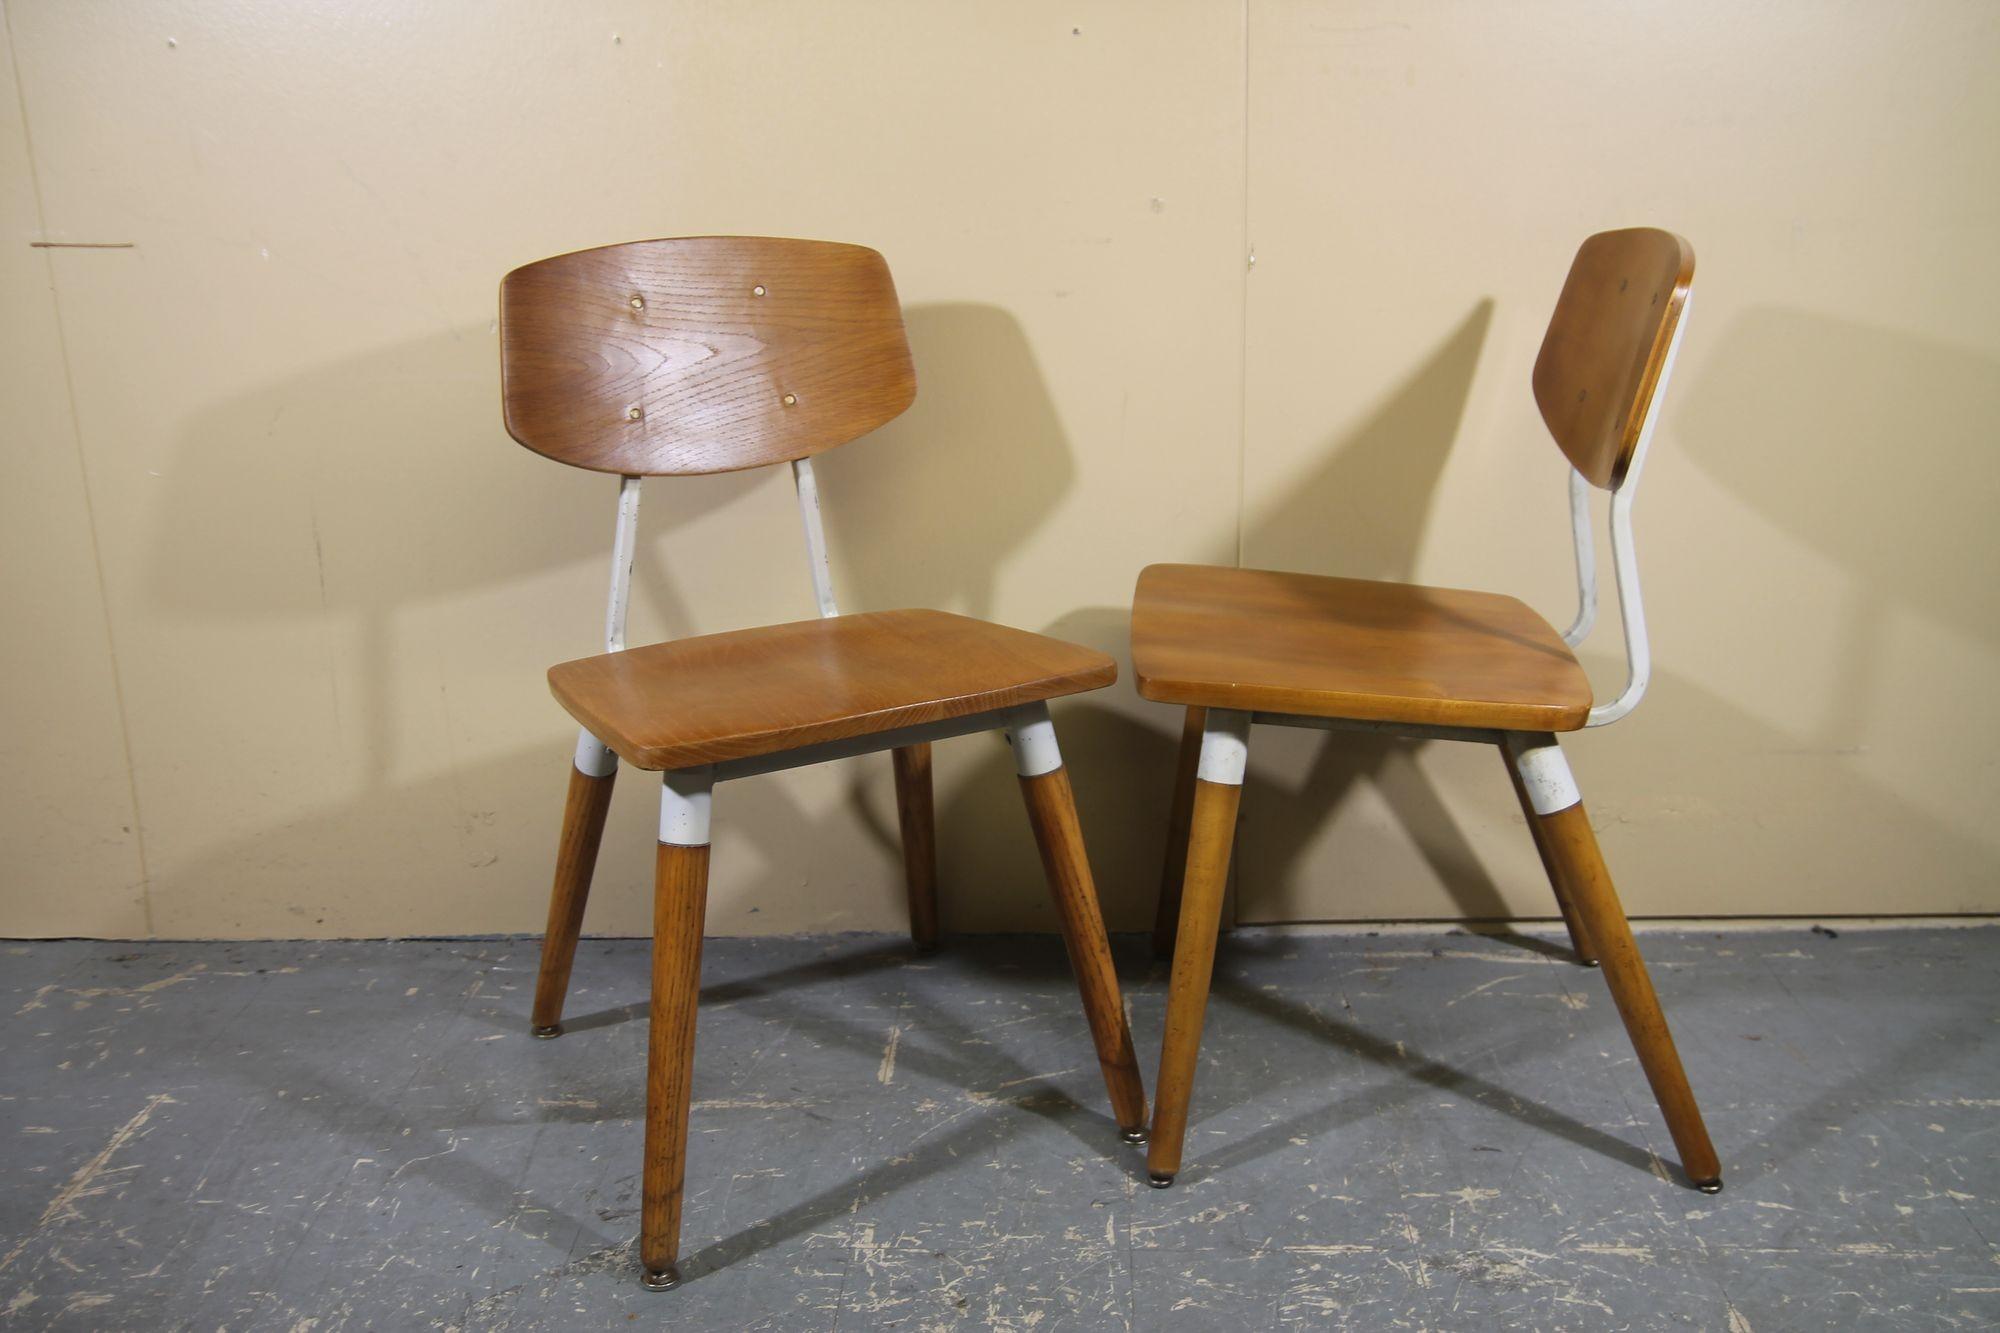 Offering a nice pair of chairs designed by Raymond Loewy for Hill Rom. These 1950's waiting room chairs are made with walnut and steel painted white. A great pair of chairs to go around your small table. These are in nice vintage shape